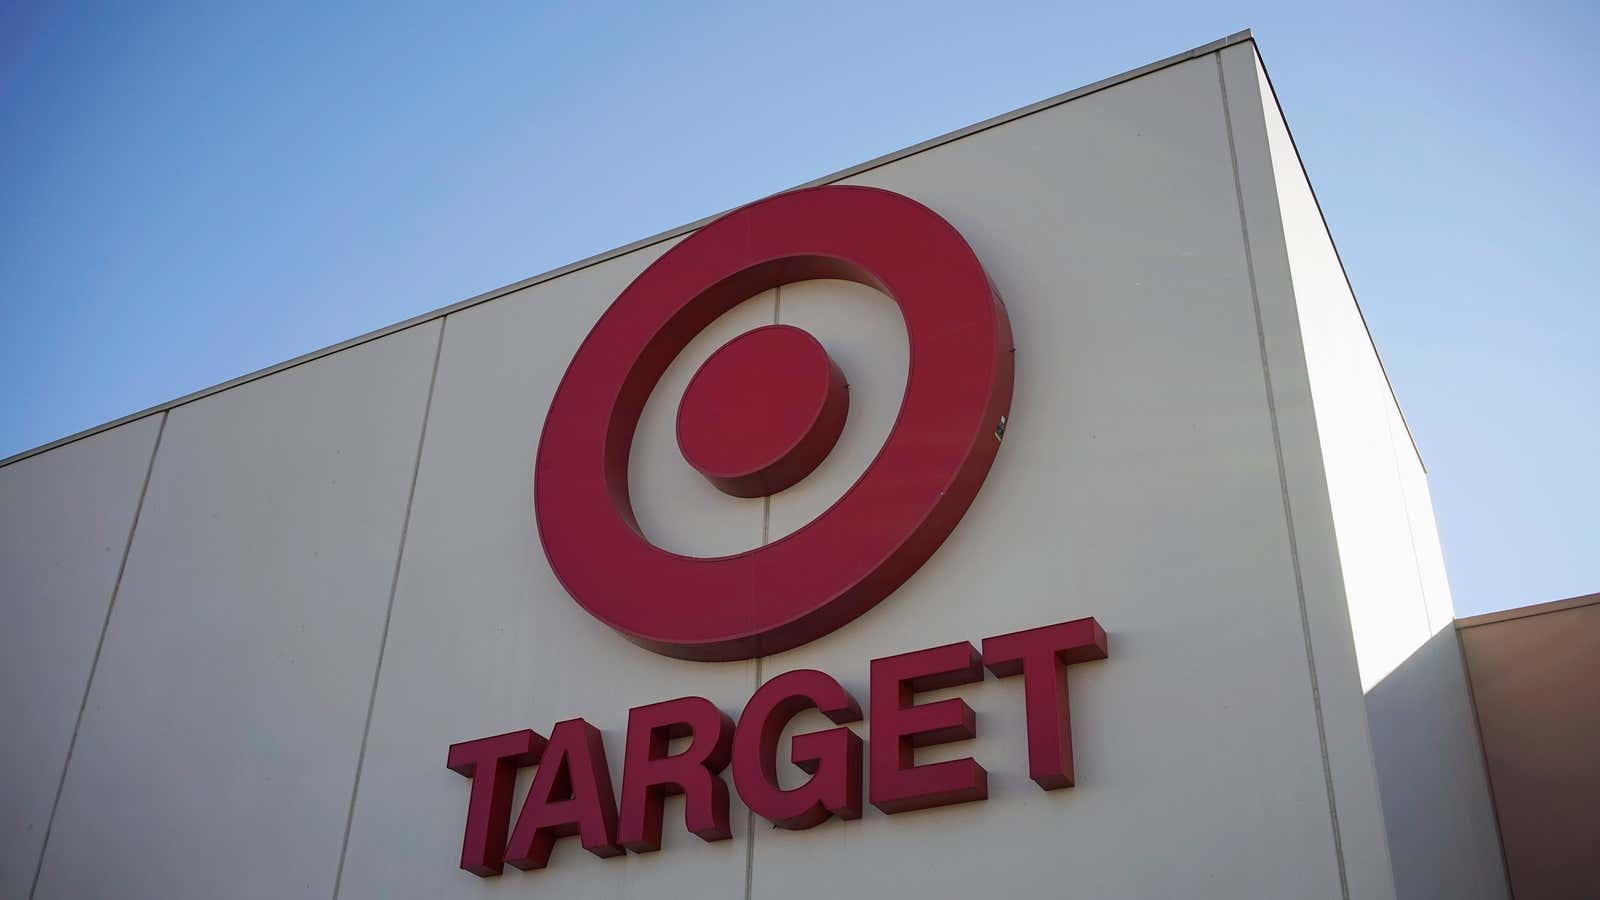 Target’s stores are the foundation of its e-commerce business.